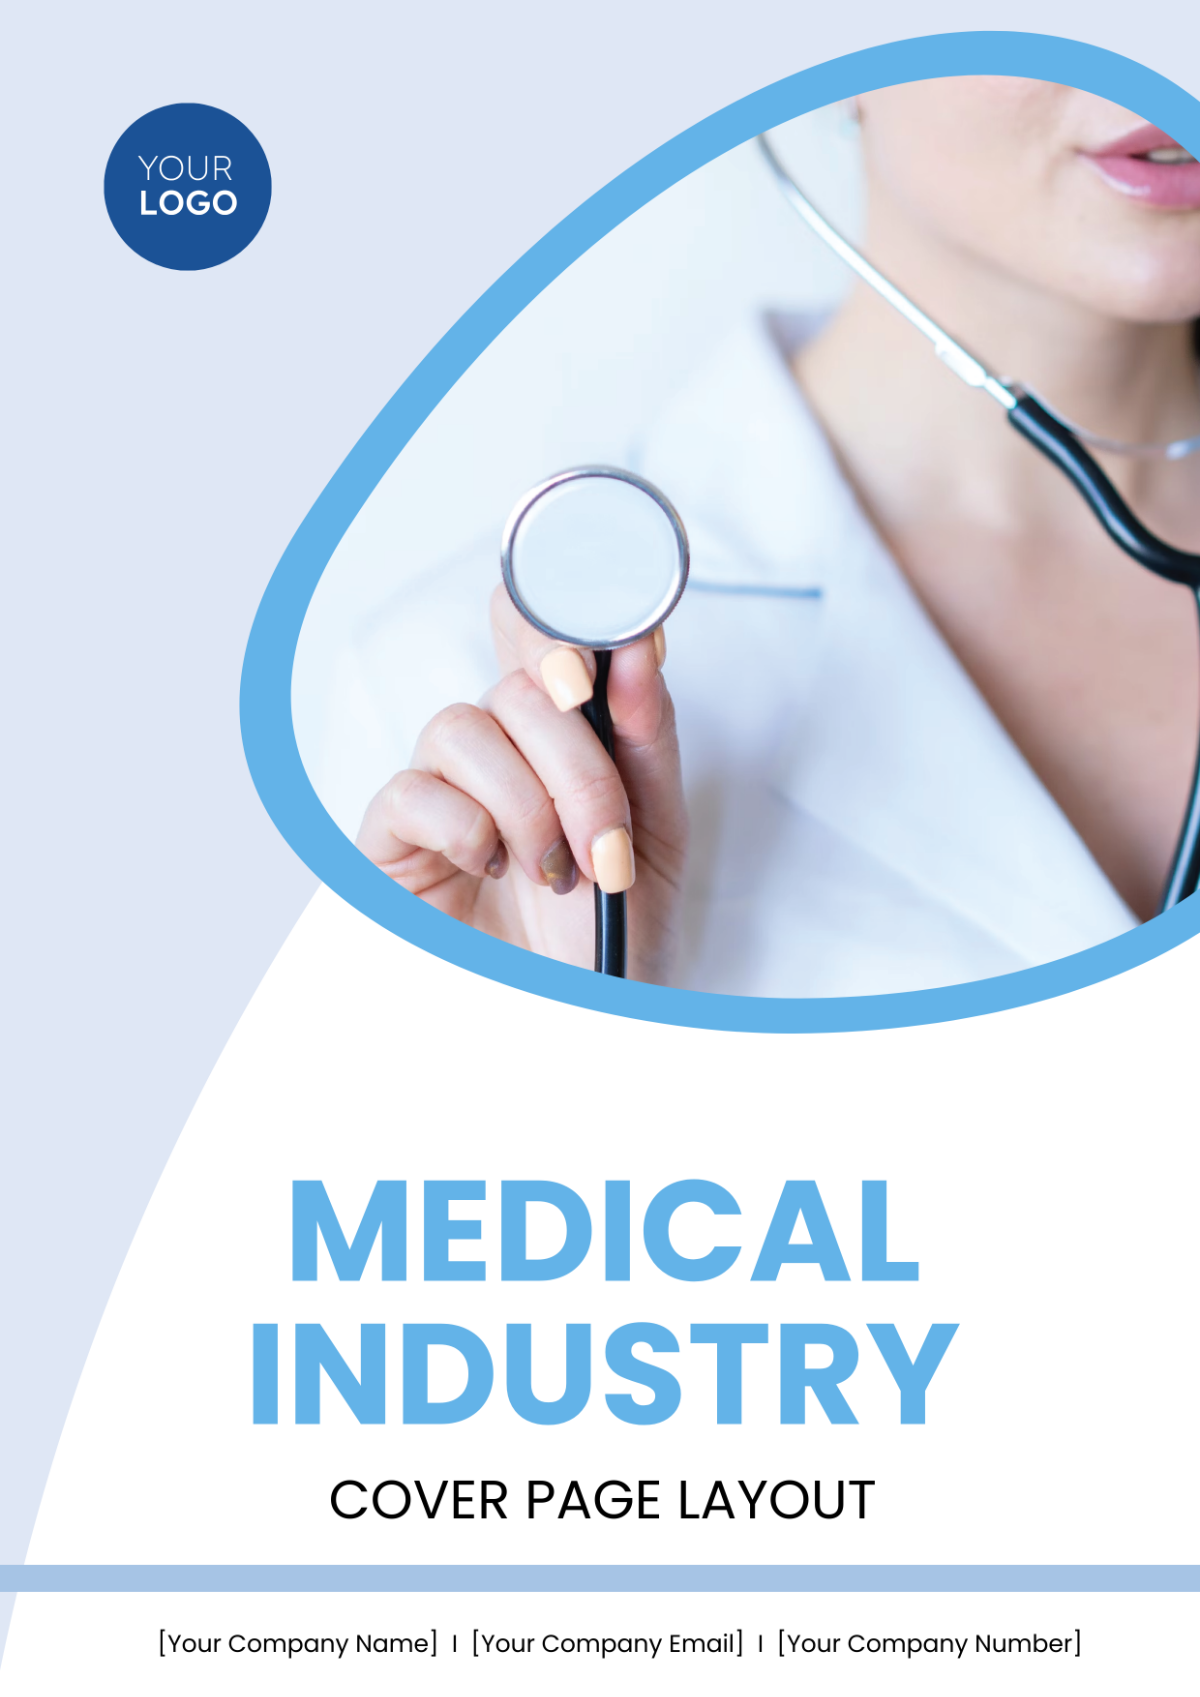 Medical Industry Cover Page Layout